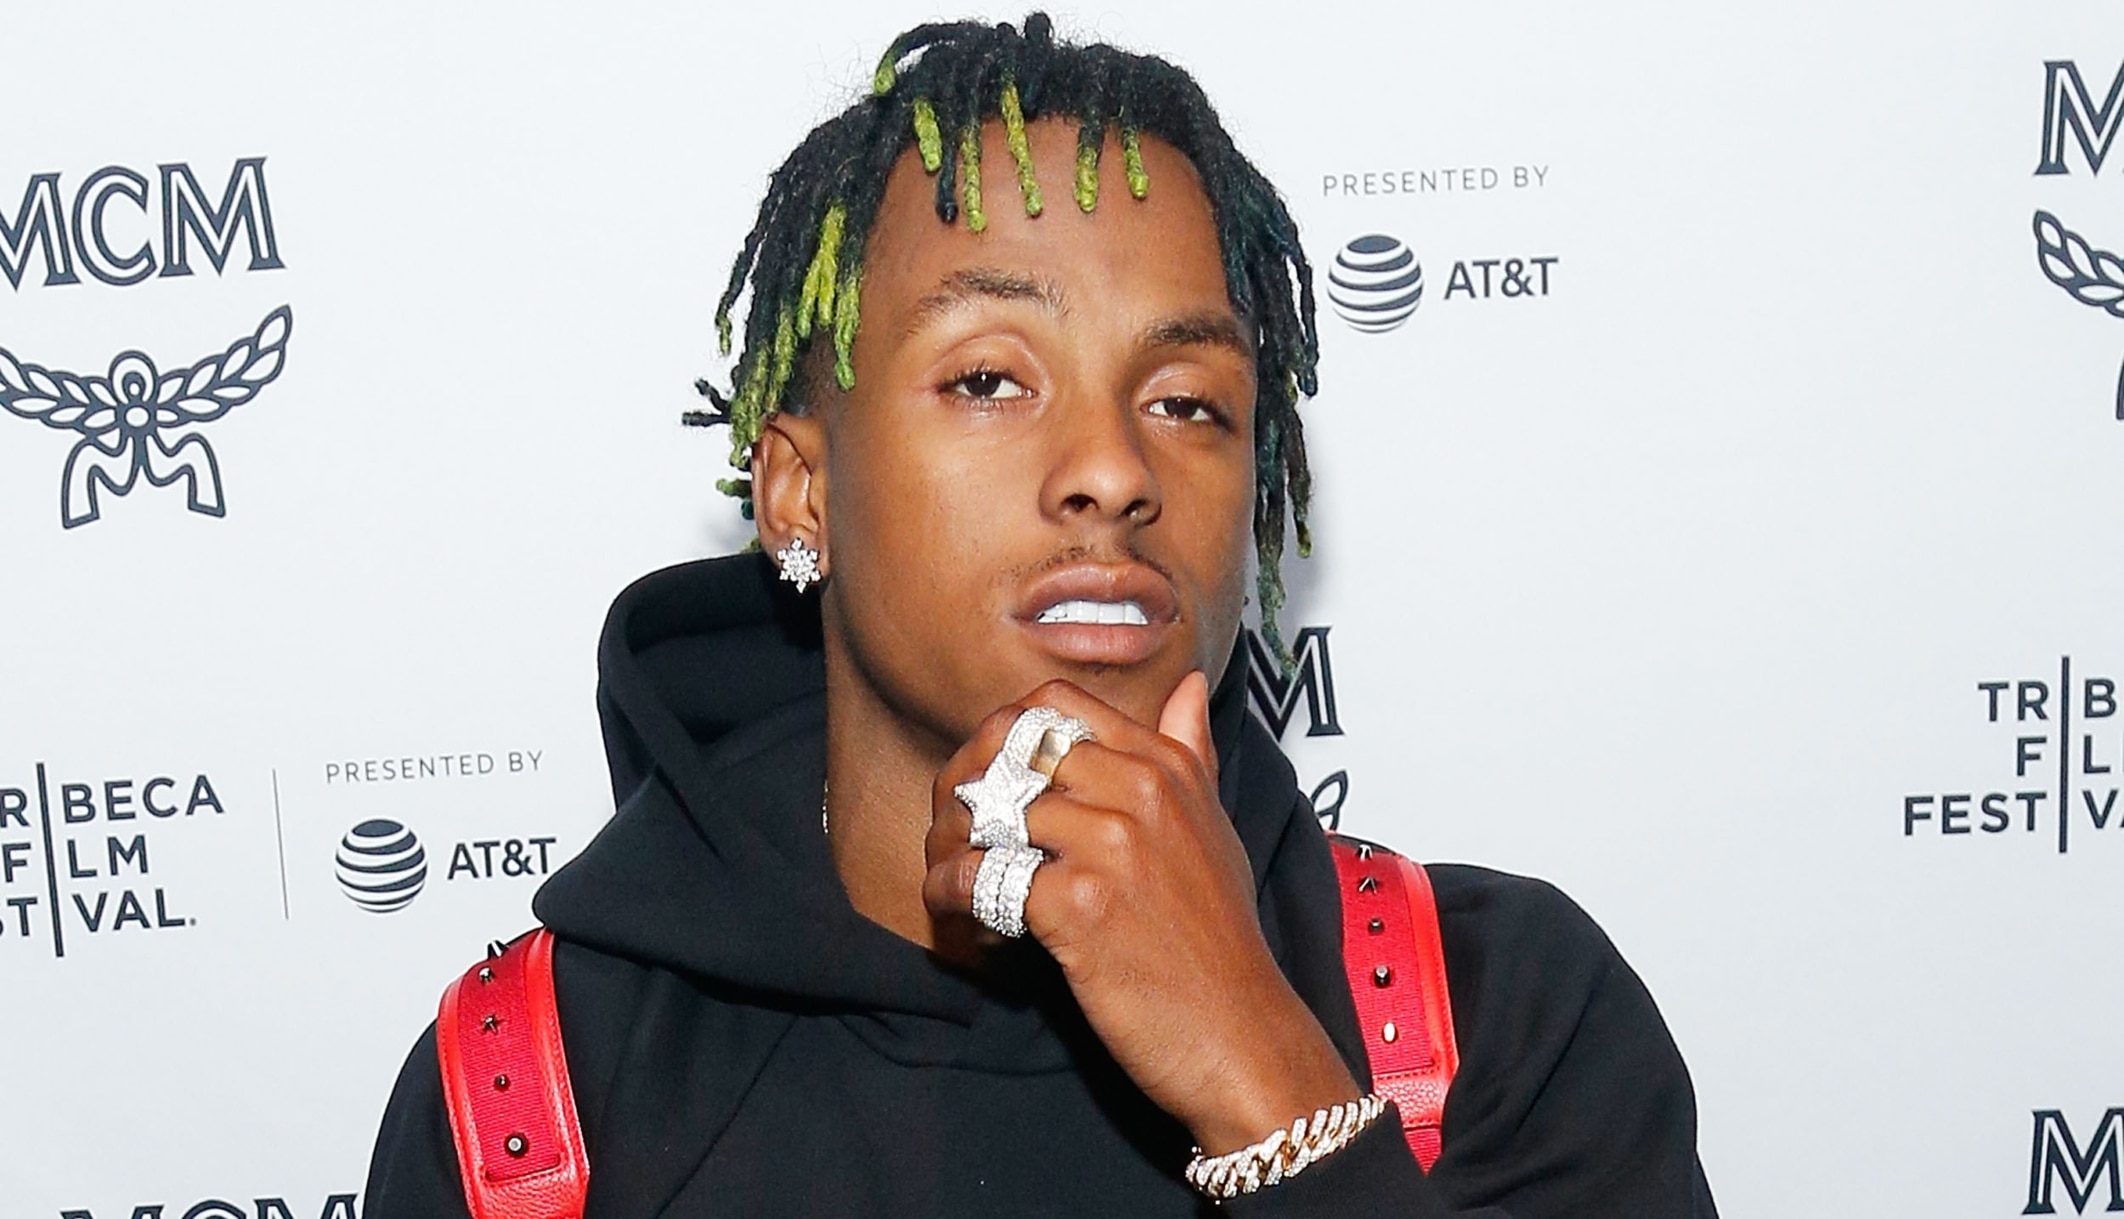 Rapper Rich the Kid pictured at an event in April 2018